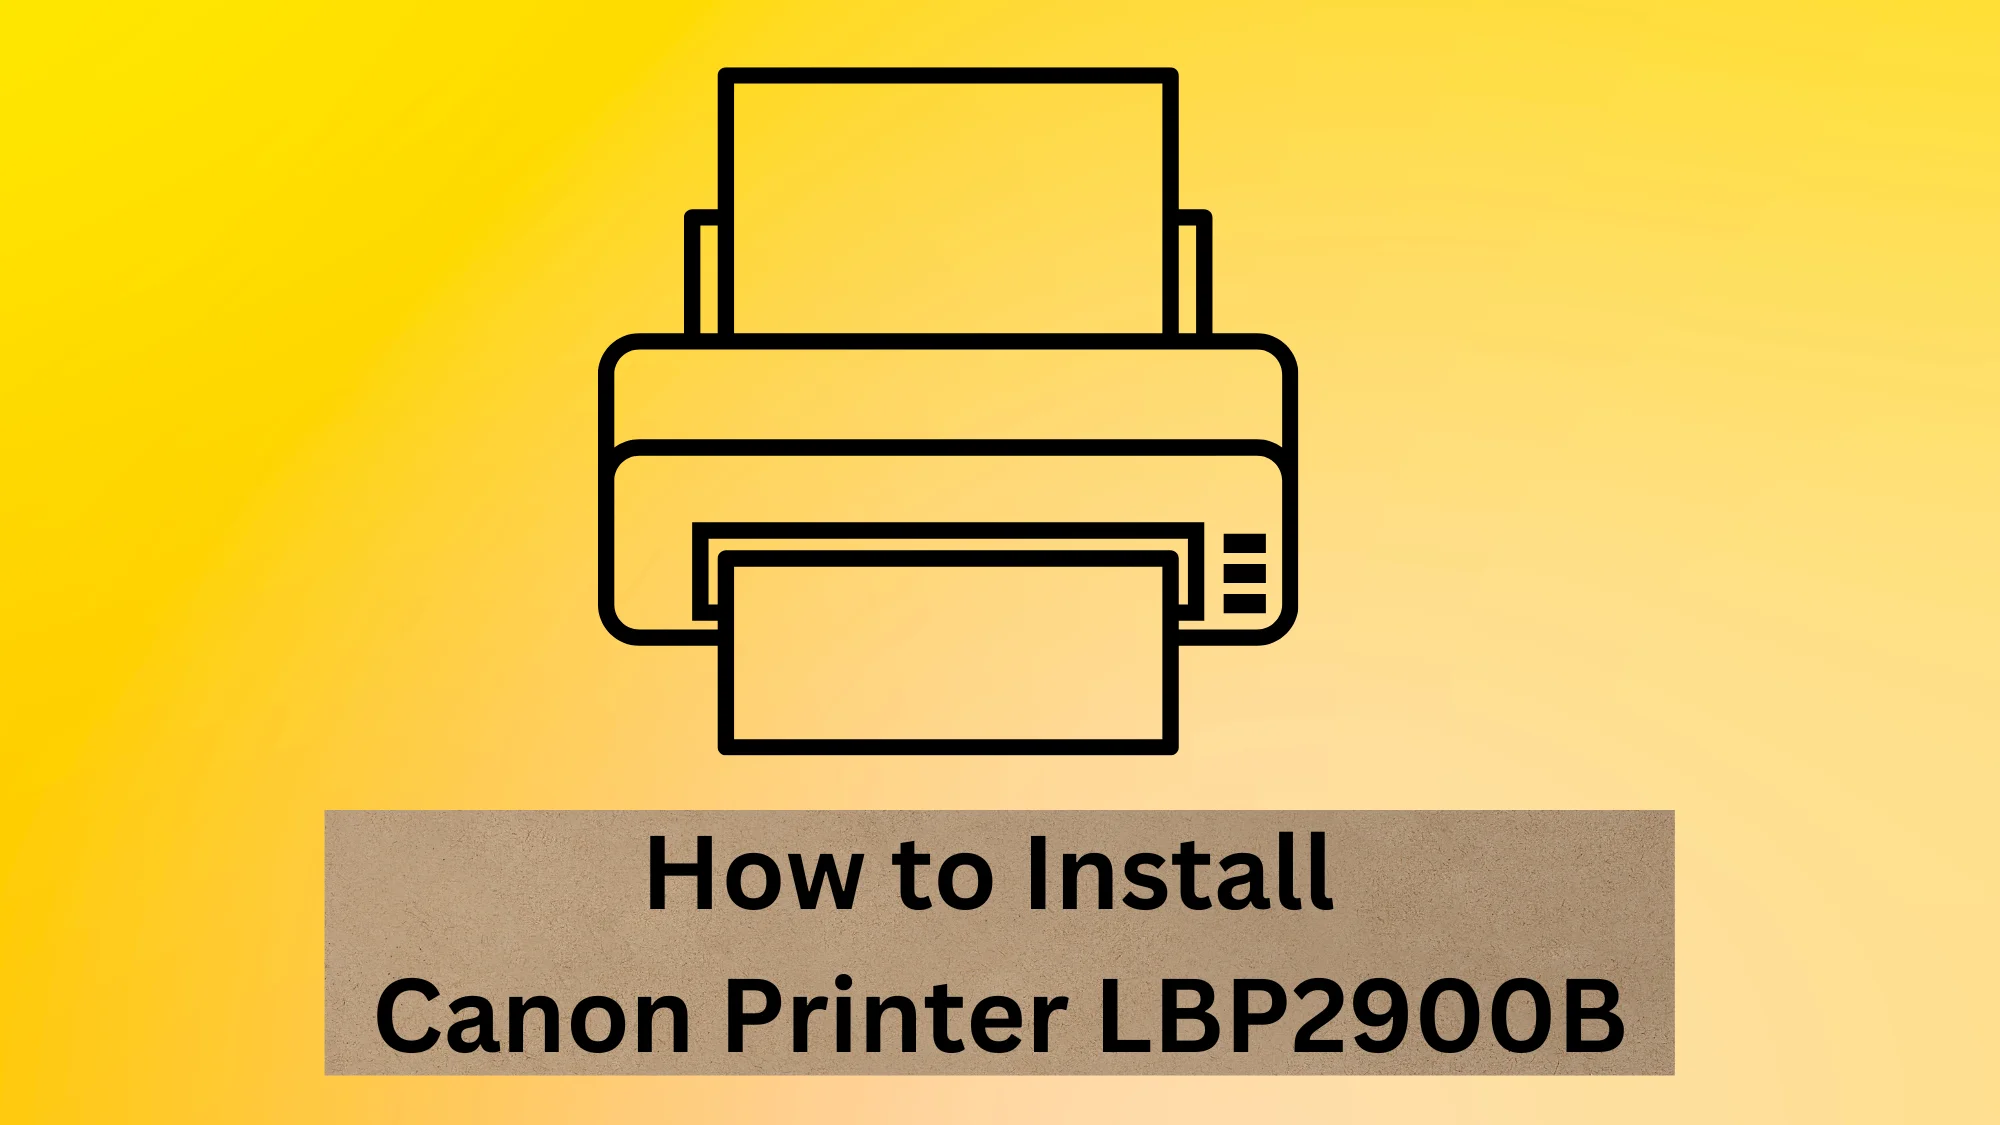 How to Install Canon Printer LBP2900B